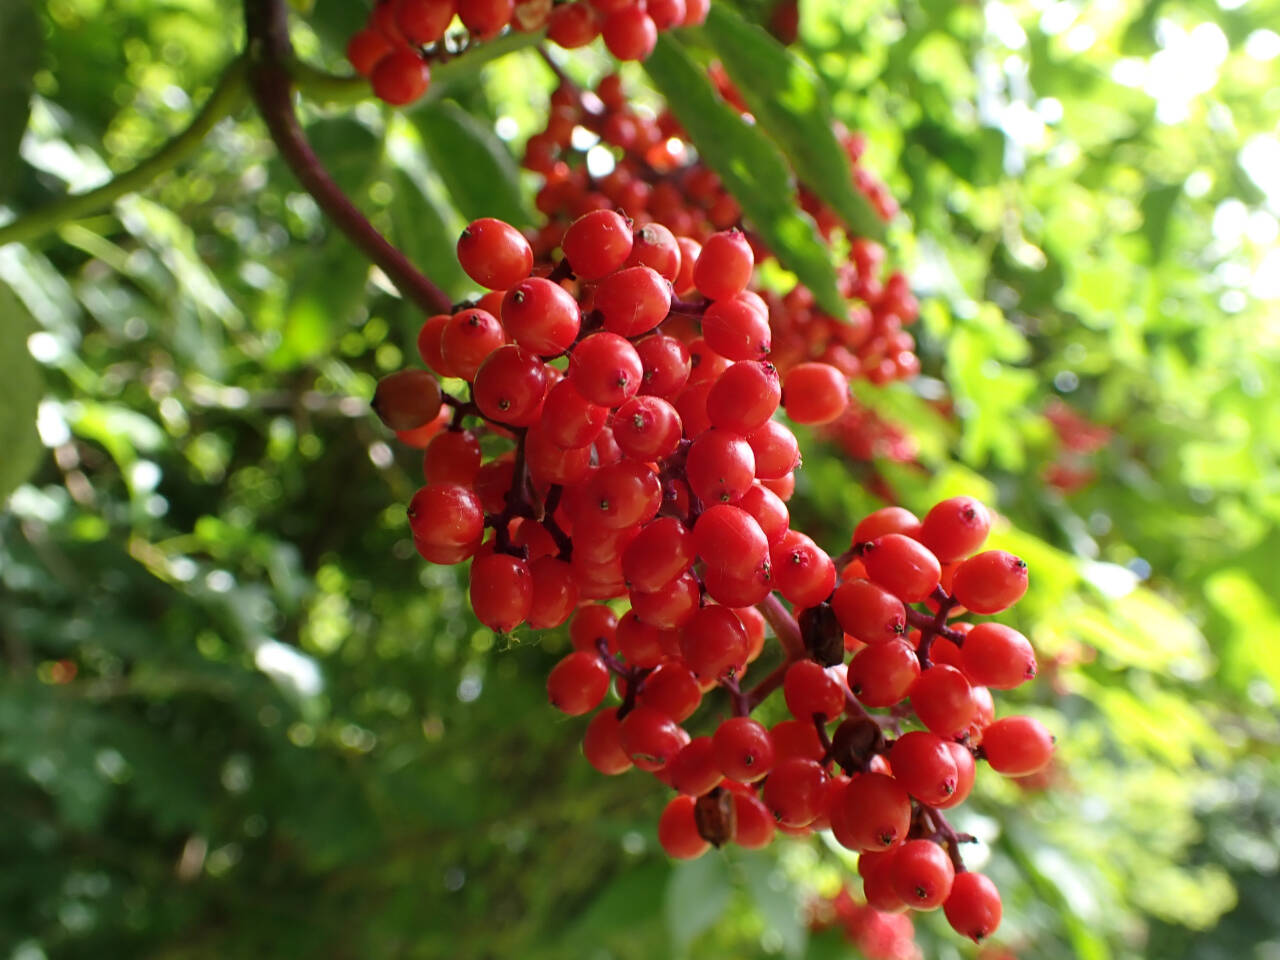 Photo by Christina St. John
Red elderberry fruit may look tasty, but the seeds are poisonous.